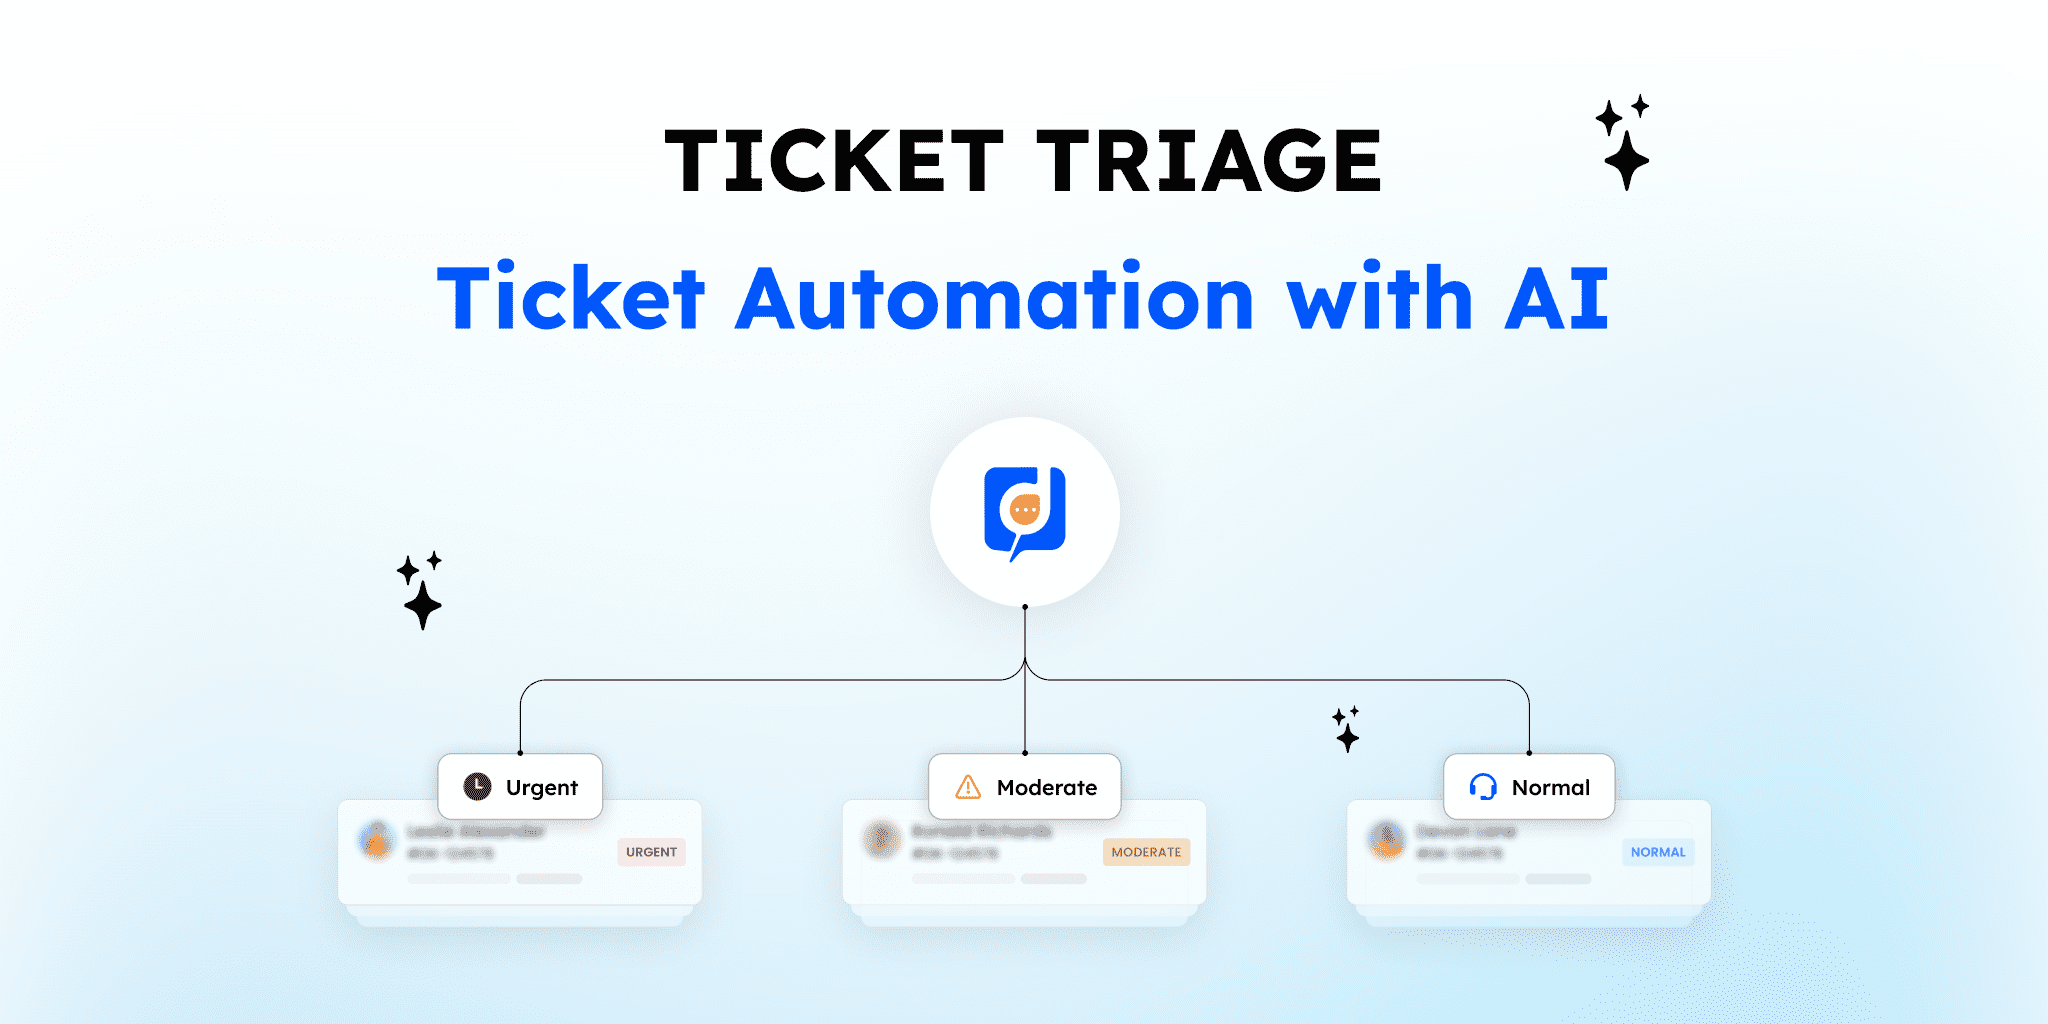 Ticket Triage using ai and automations